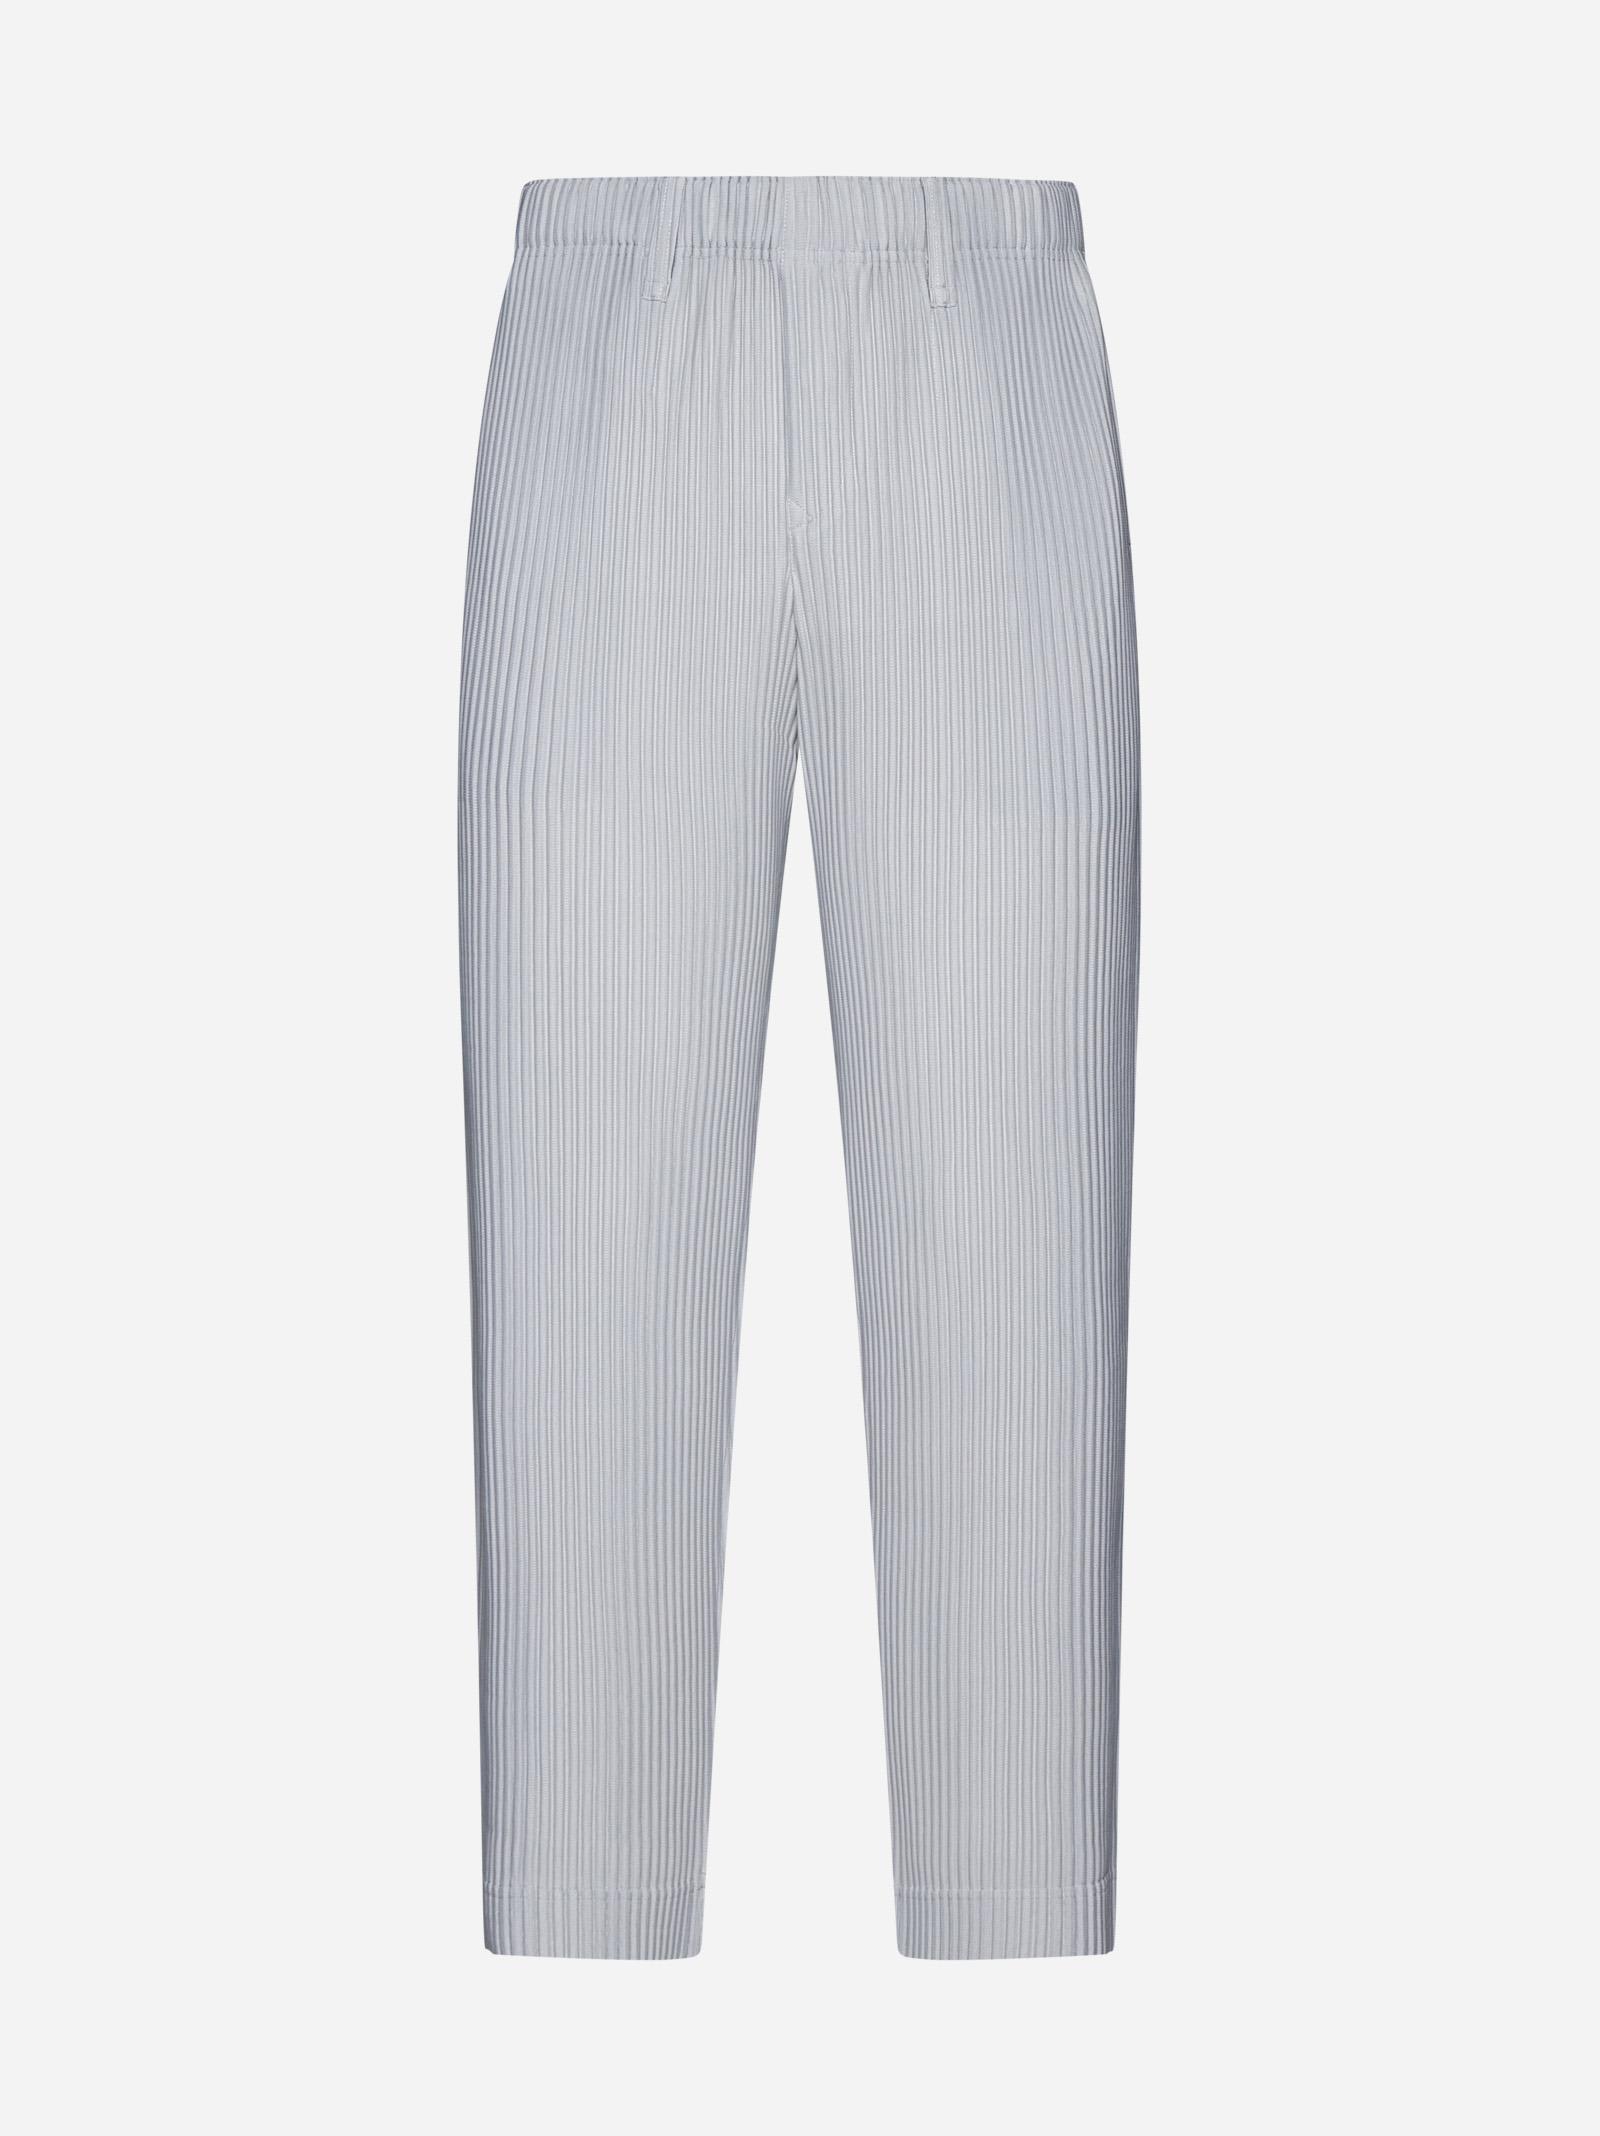 Pleated Fabric Trousers